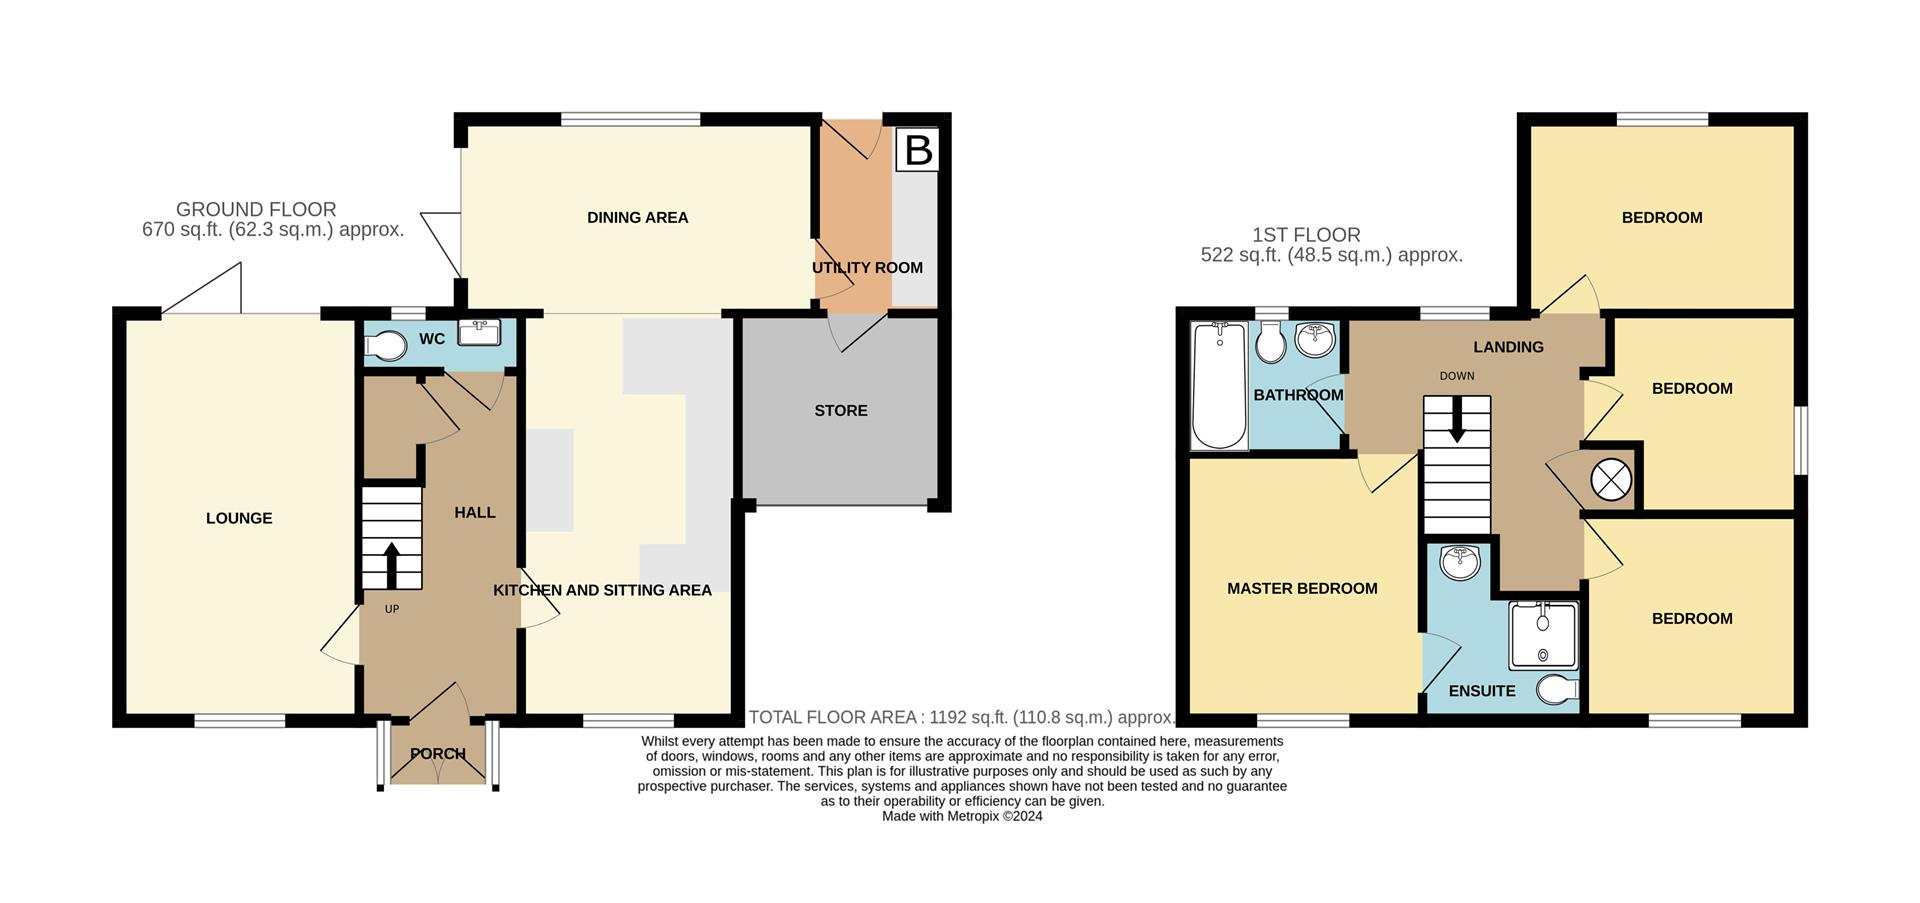 4 bed end of terrace house for sale - Property floorplan